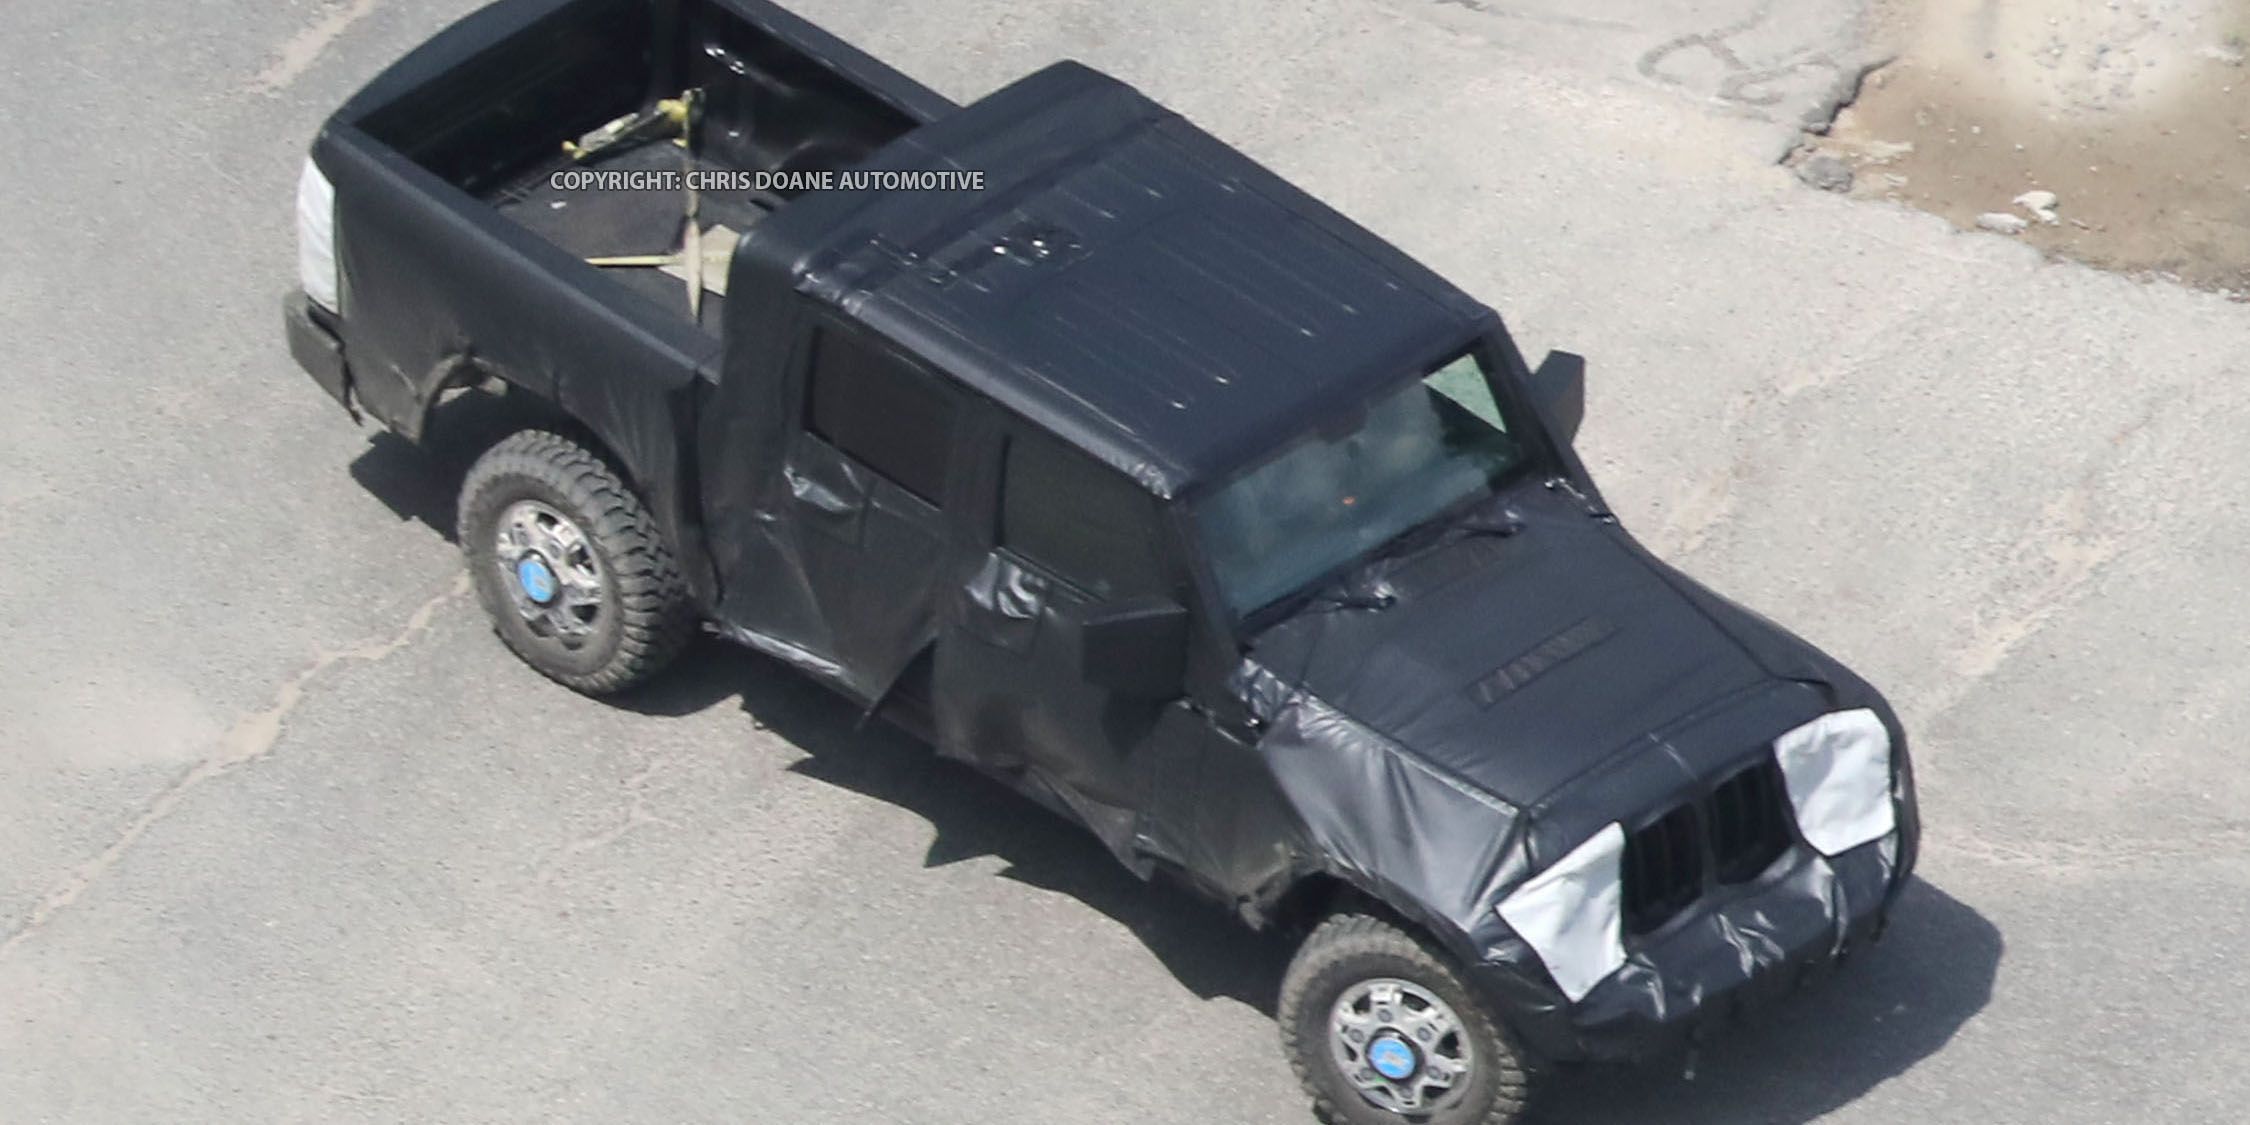 The Jeep Wrangler Pickup Will Debut in Mid-2018, Trackhawk in 2017